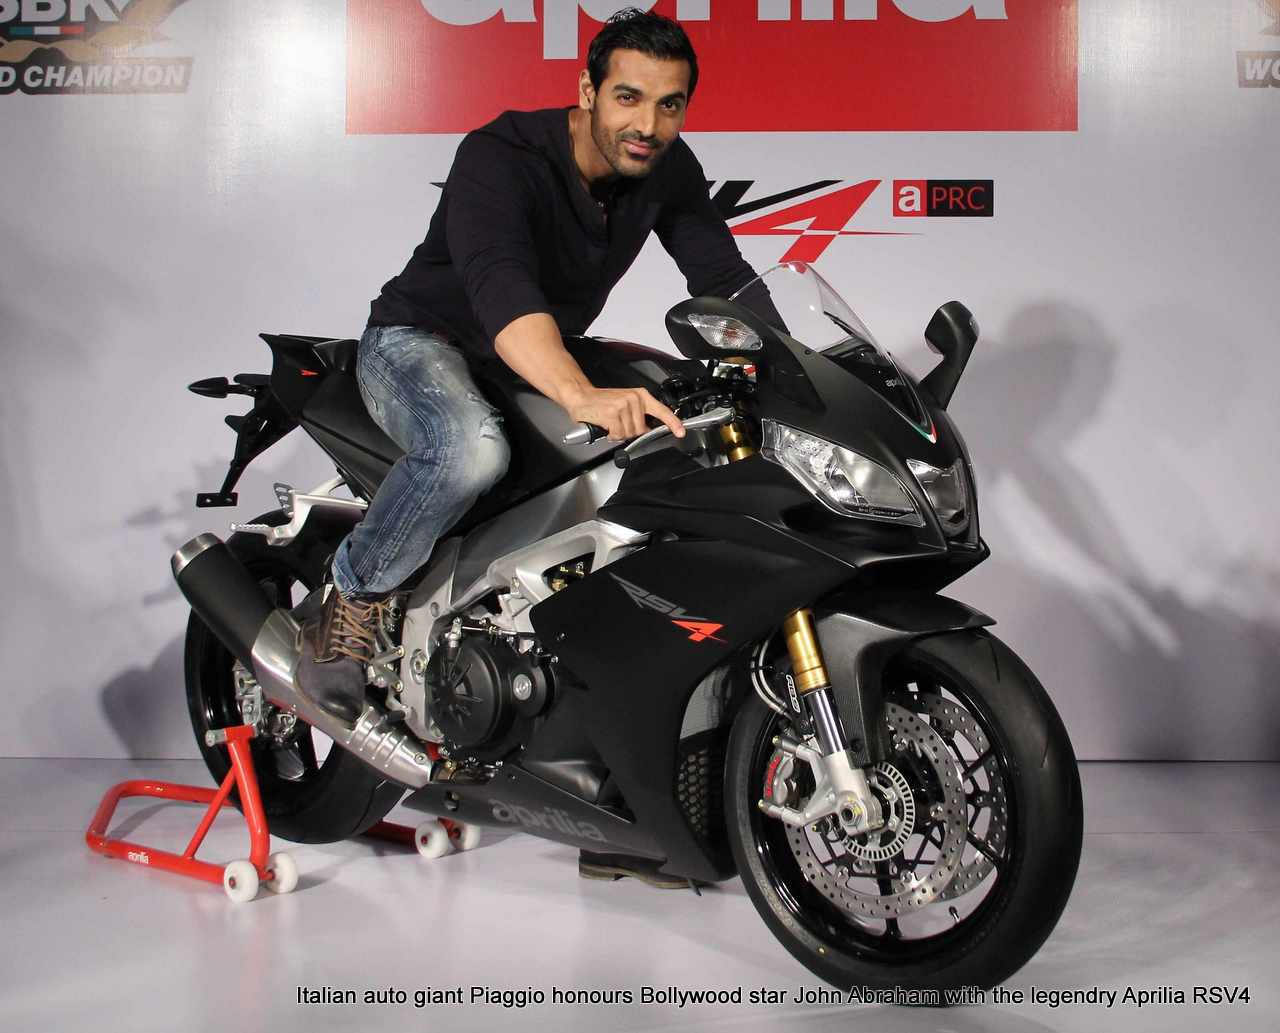 John Abraham Cars And Bike Collection 2021 List, Prices